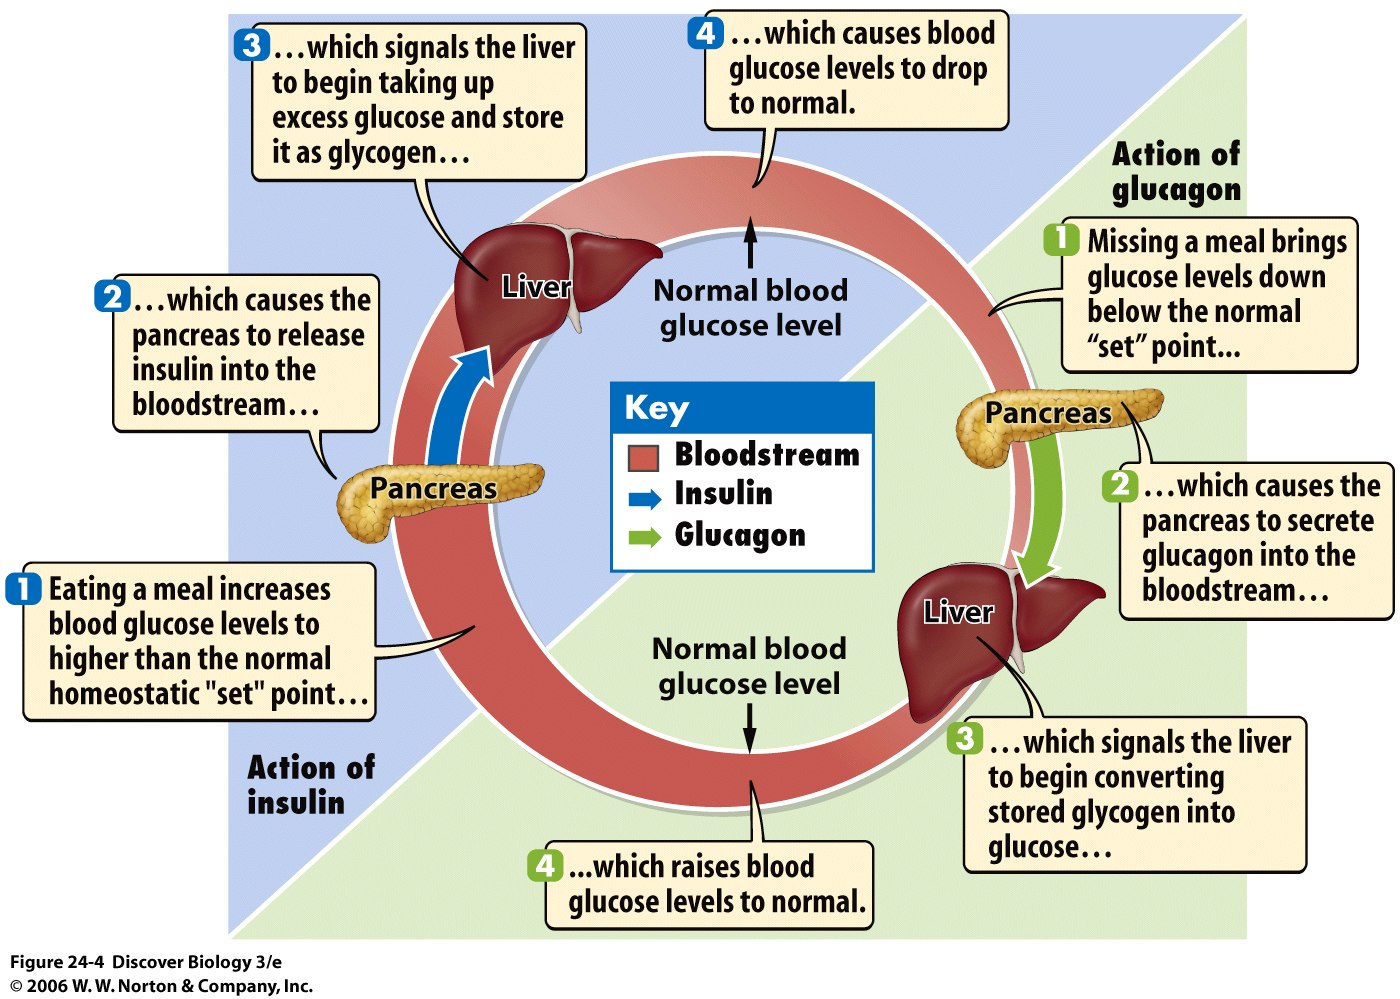 Some hormones control blood glucose levels in humans: insulin ...